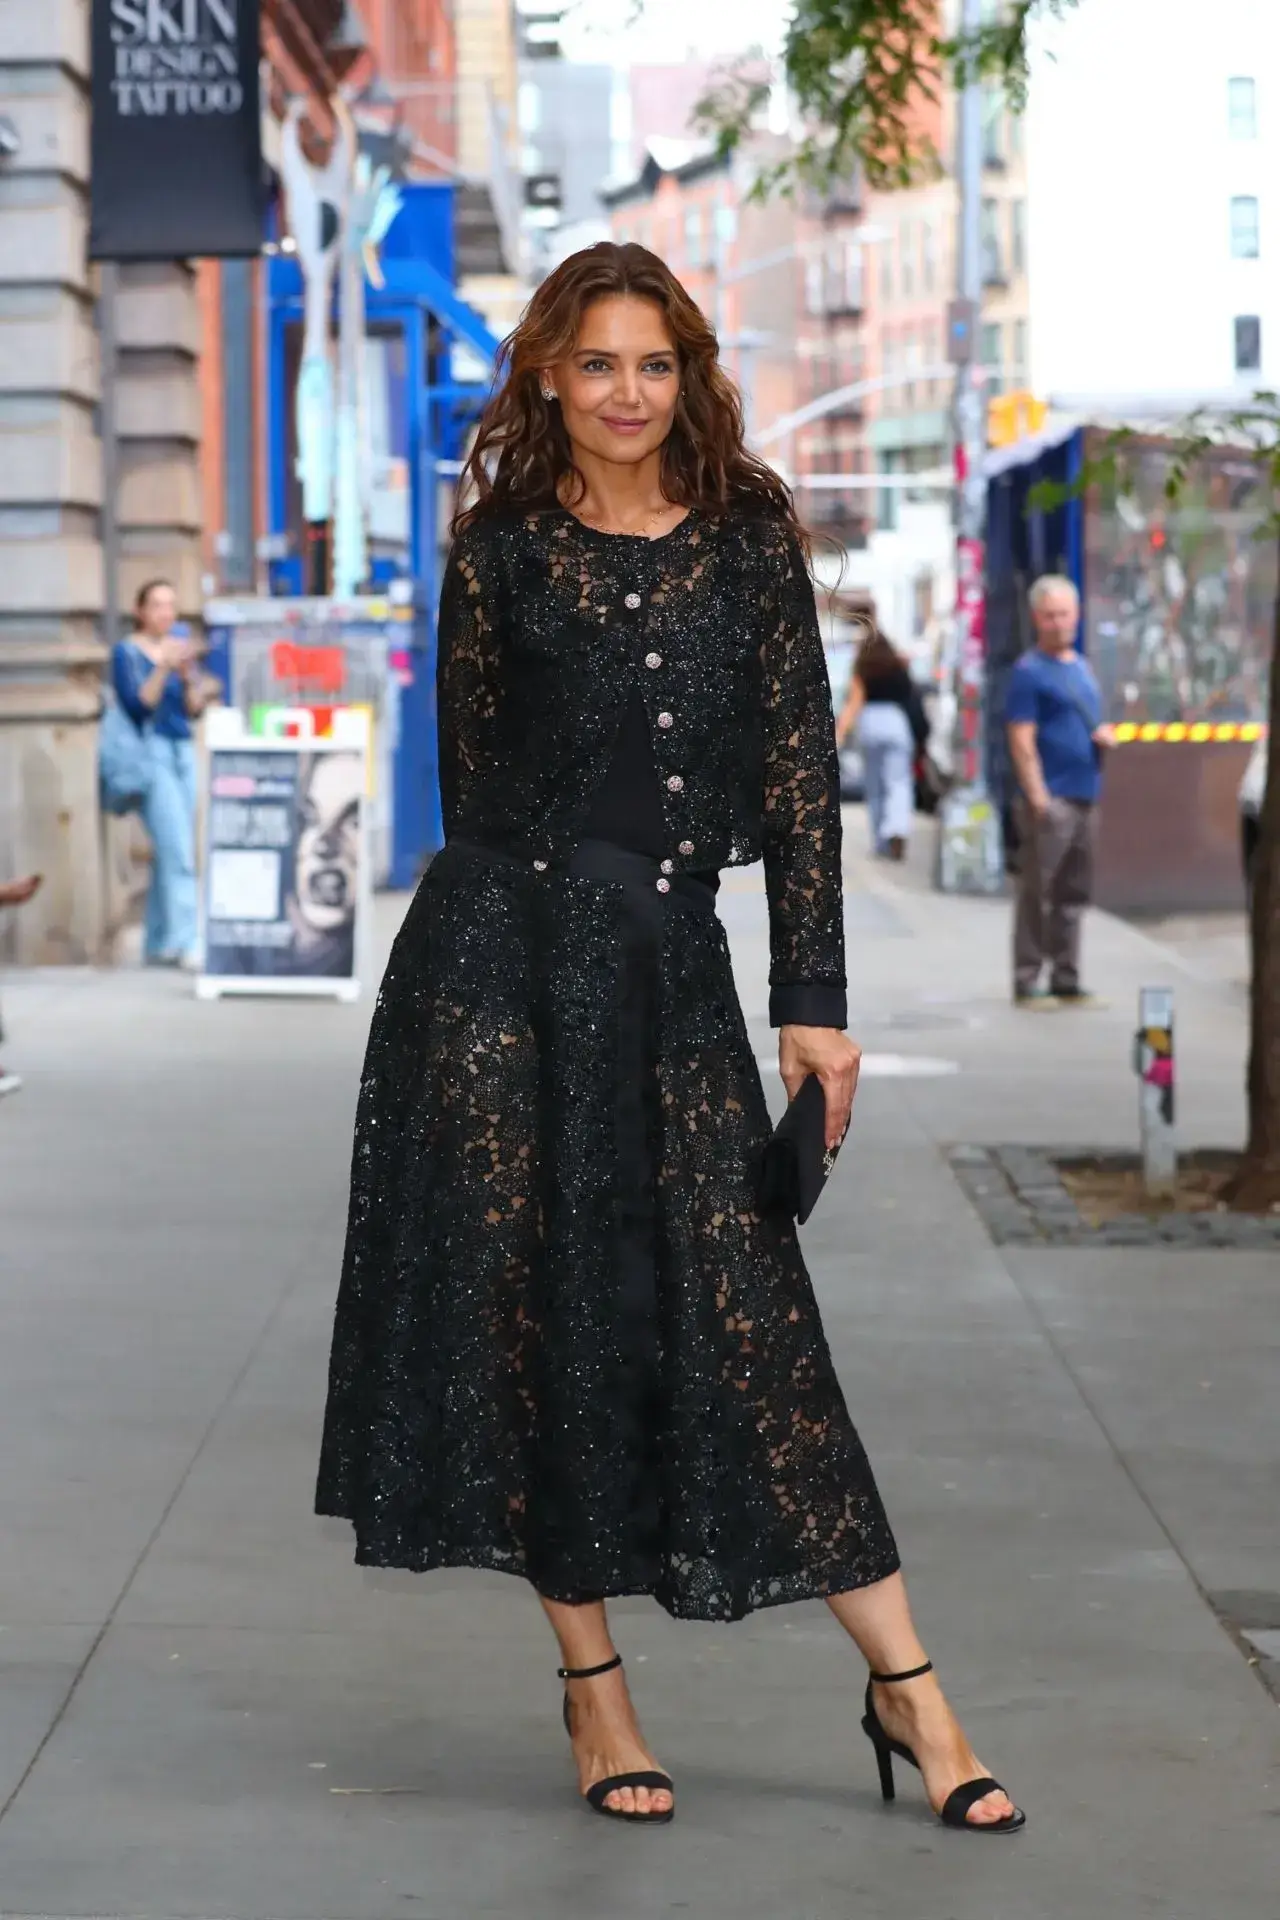 KATIE HOLMES SEEN IN A STUNNING BLACK DRESS IN NEW YORK CITY STREETS 4